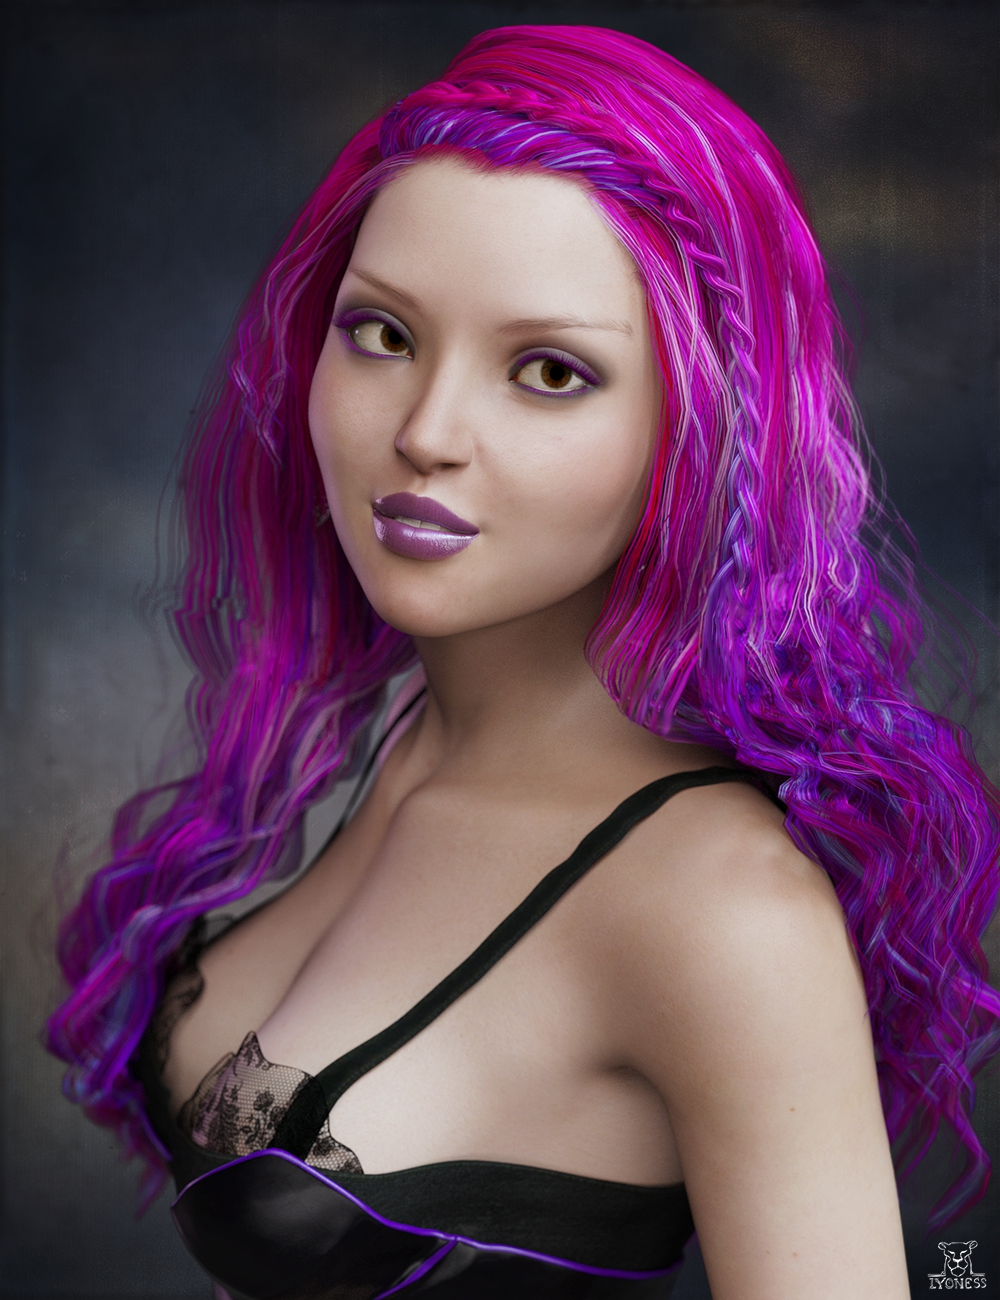 LY Violante HD for Victoria 7 by: LyonessSR3, 3D Models by Daz 3D